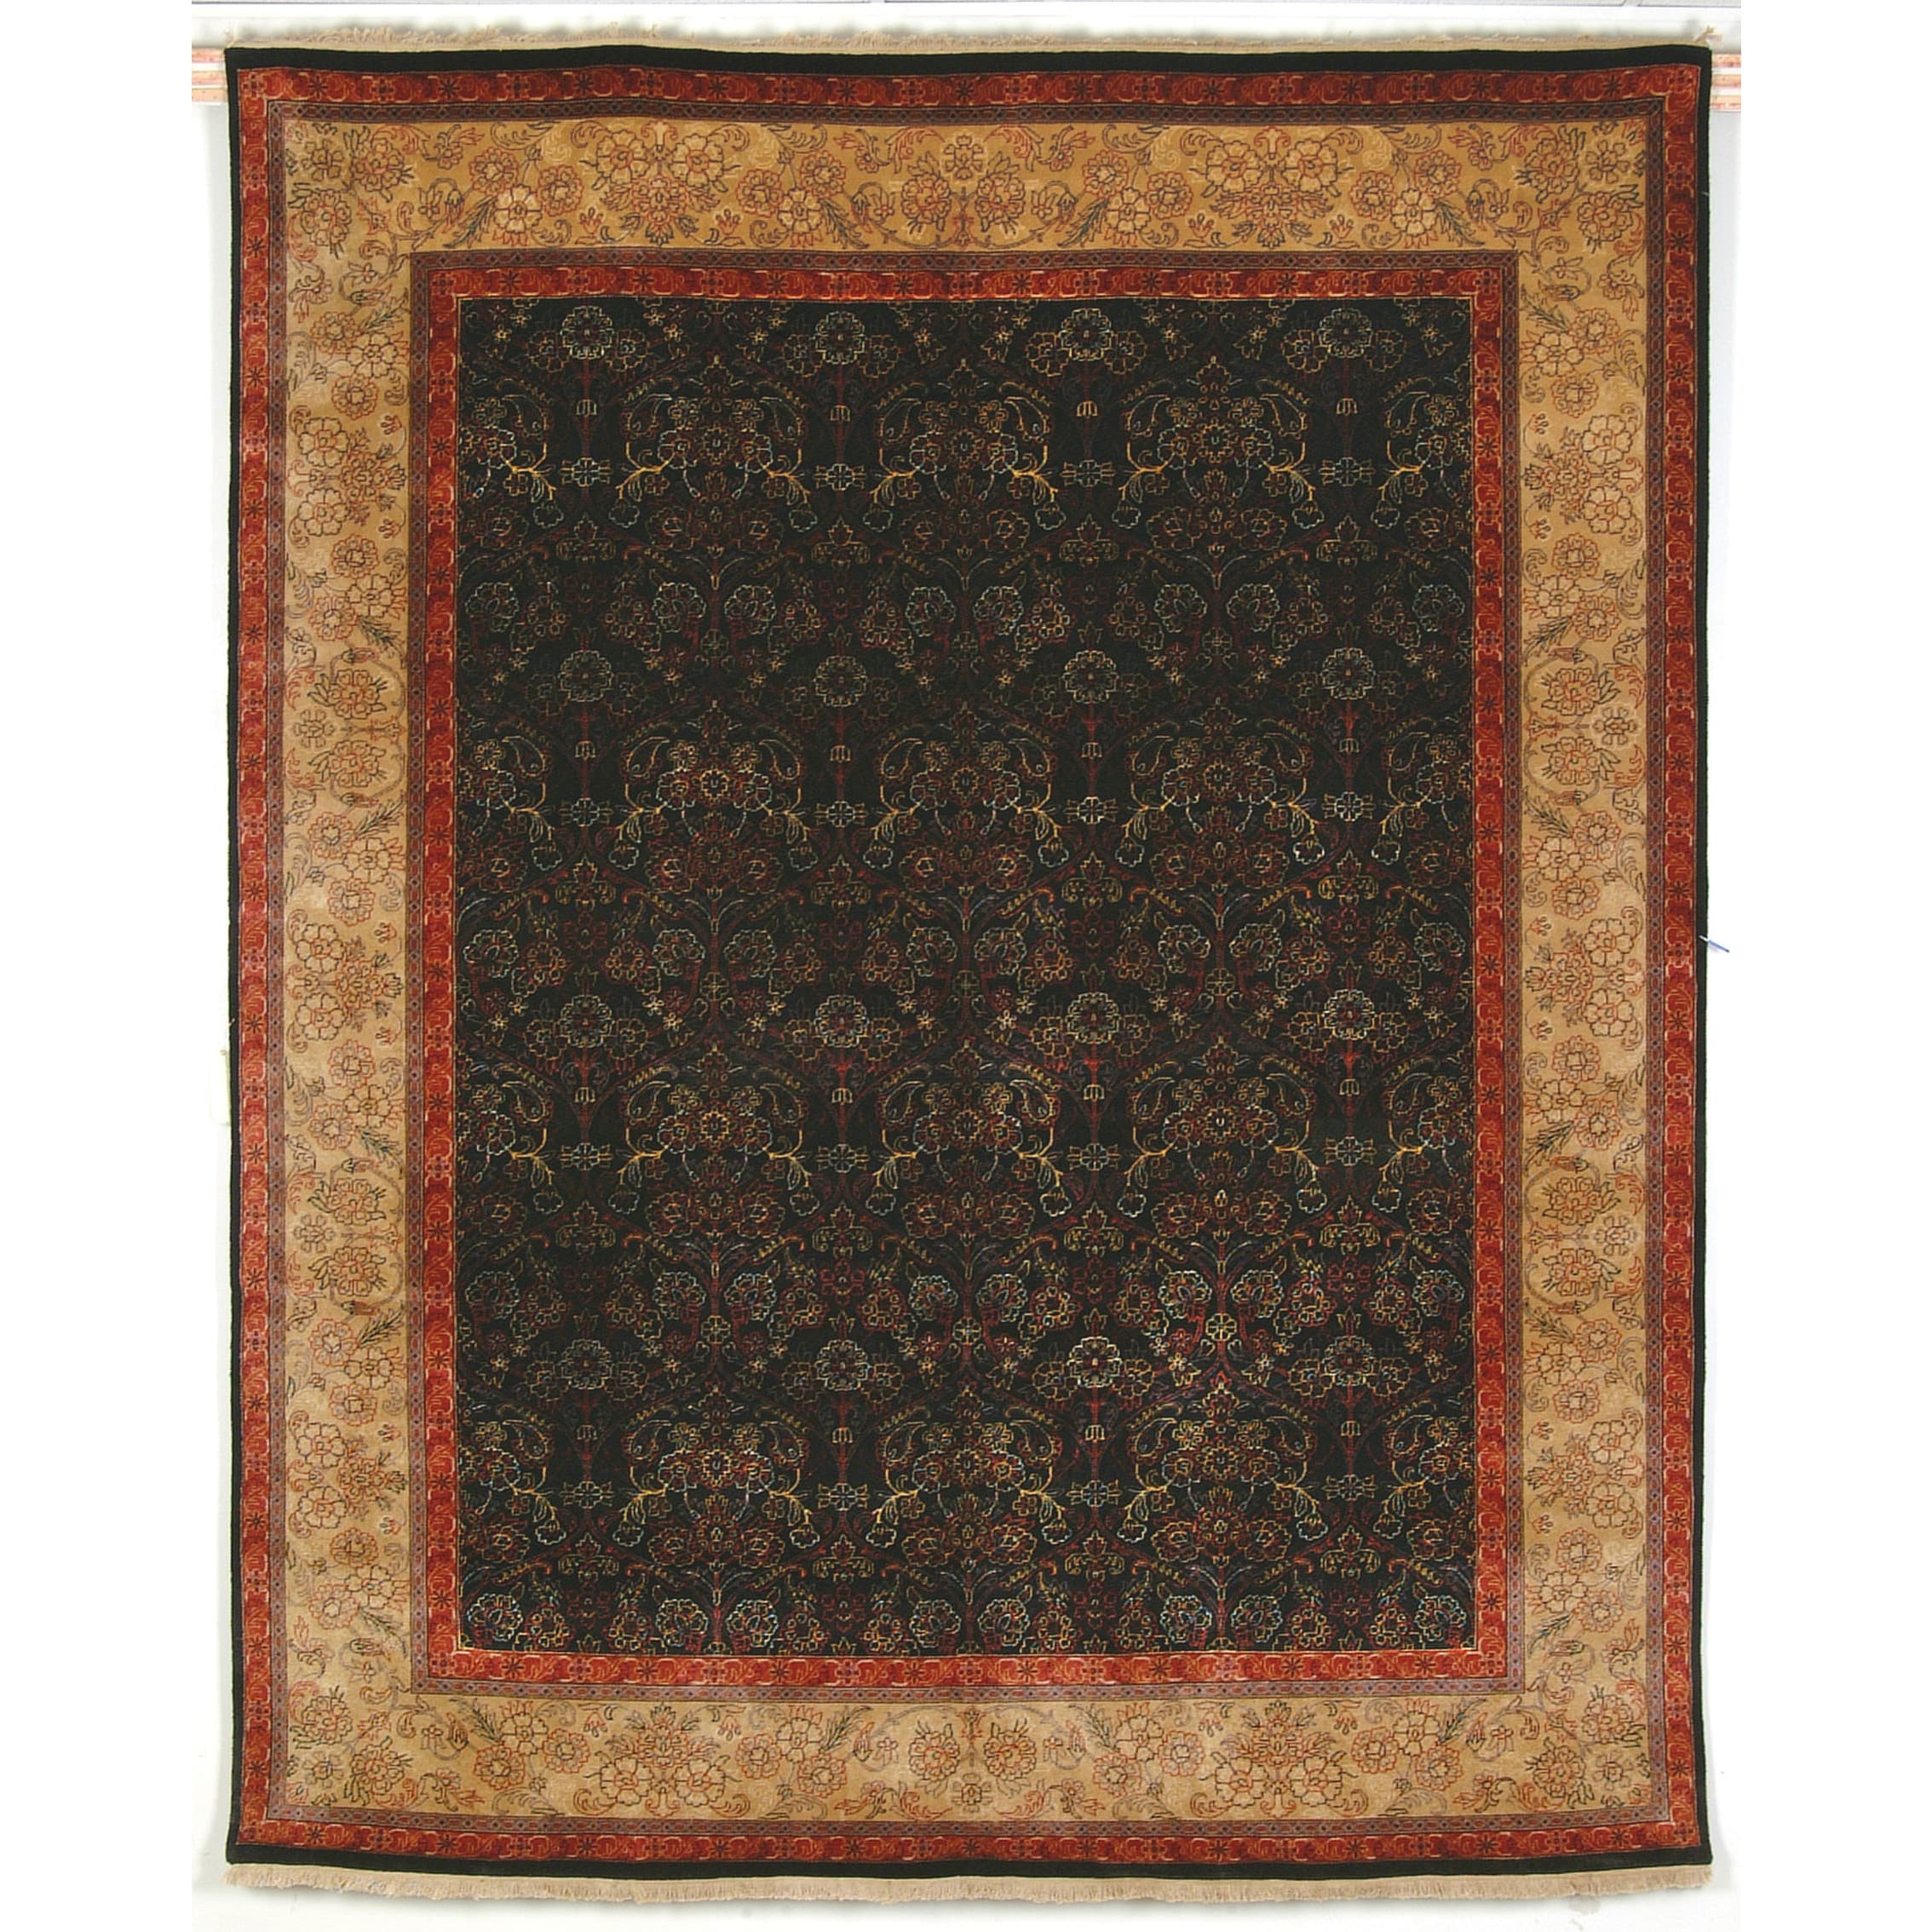 Safavieh Hand knotted Ganges River Black/ Gold Wool Rug (8 X 10)